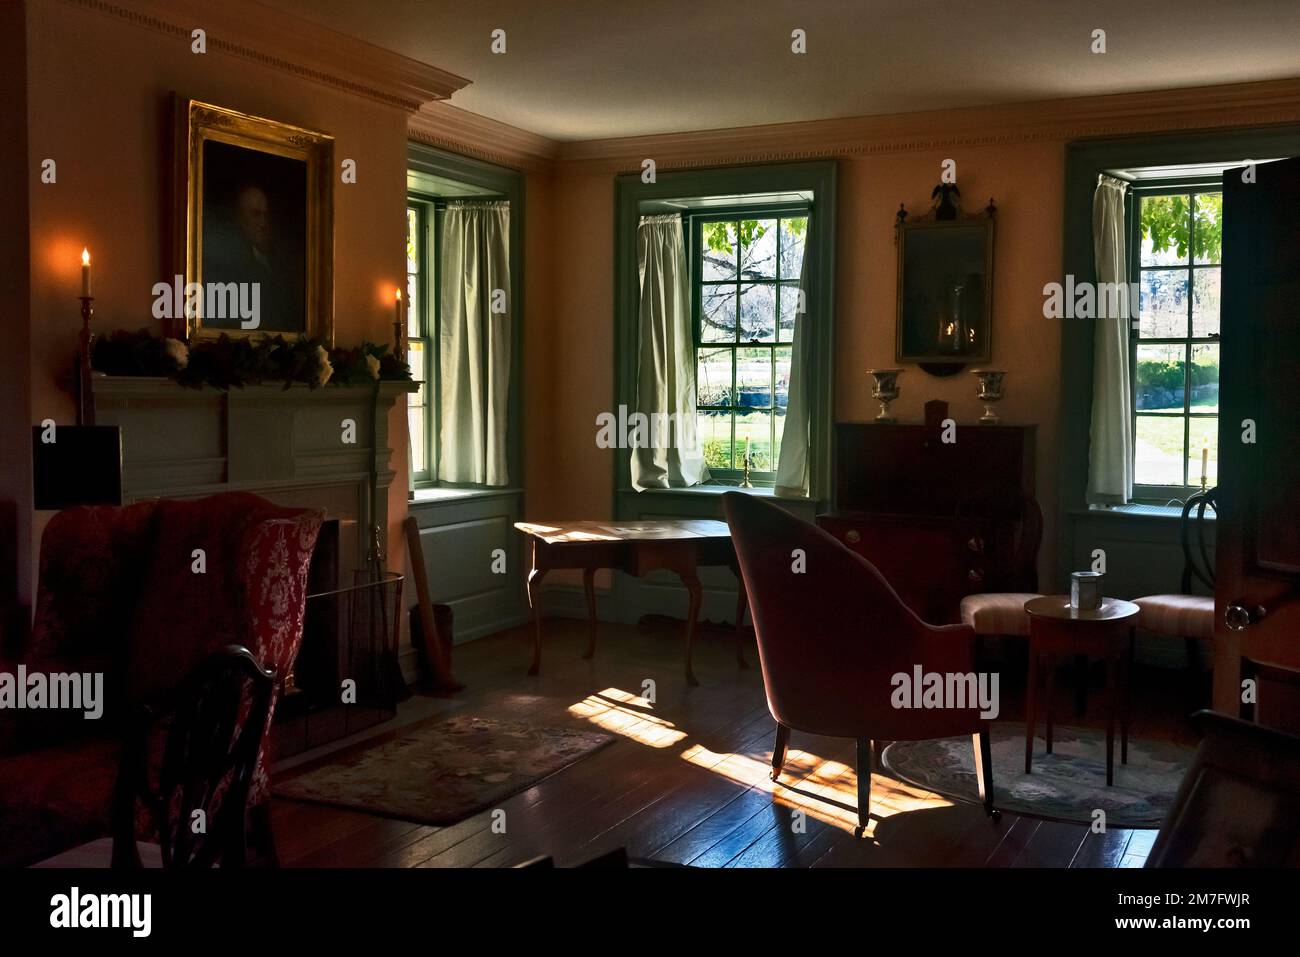 One of the rooms. Hagley Museum, Wilmington, Delaware, USA Stock Photo